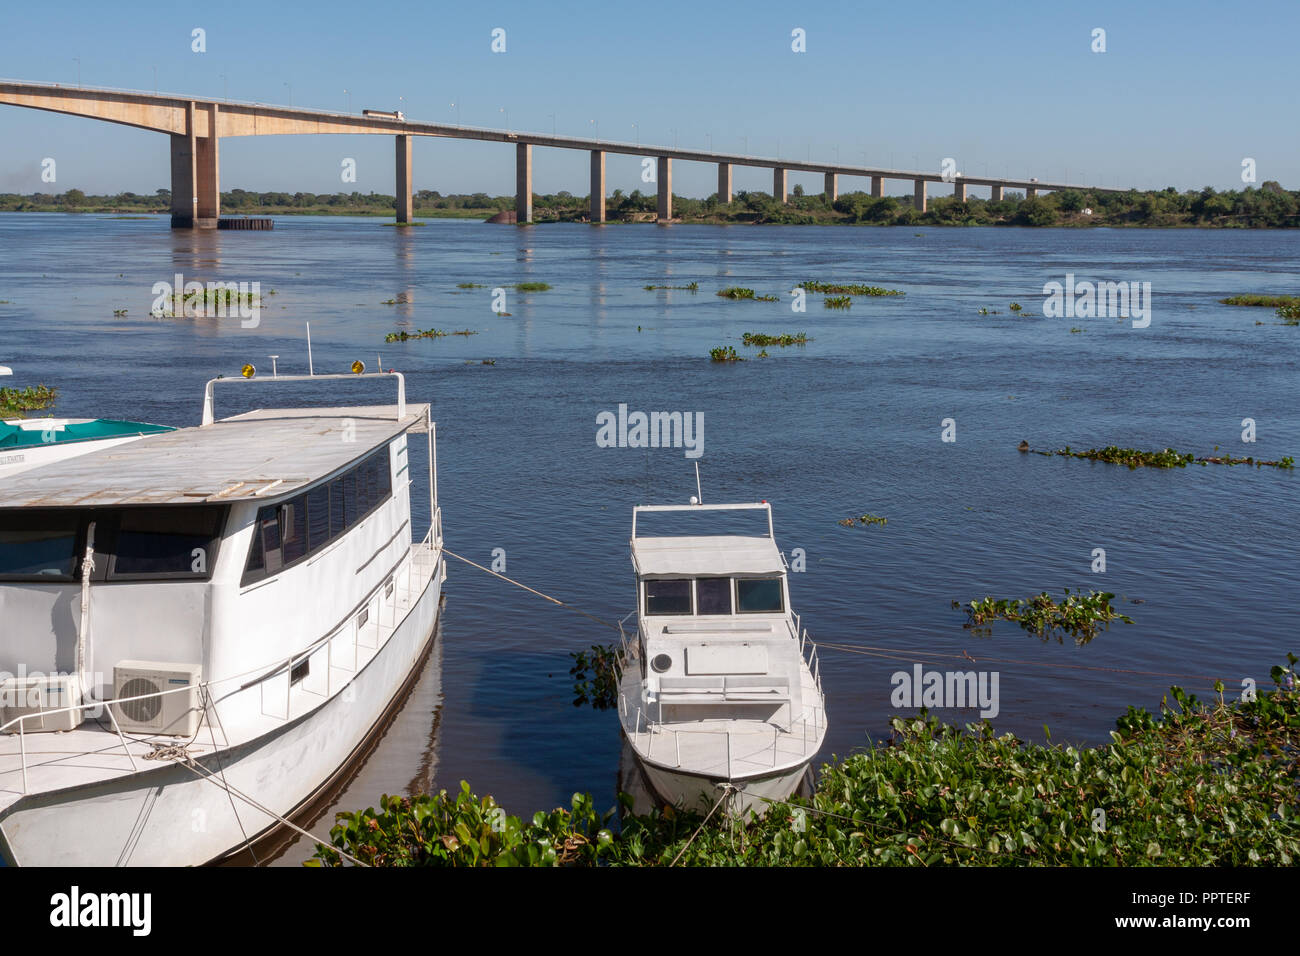 Boats at riverside, Rio (River) Paraguay, Puente (Bridge) Remanso Castillo on the background, Mariano Roque Alonso, Paraguay Stock Photo